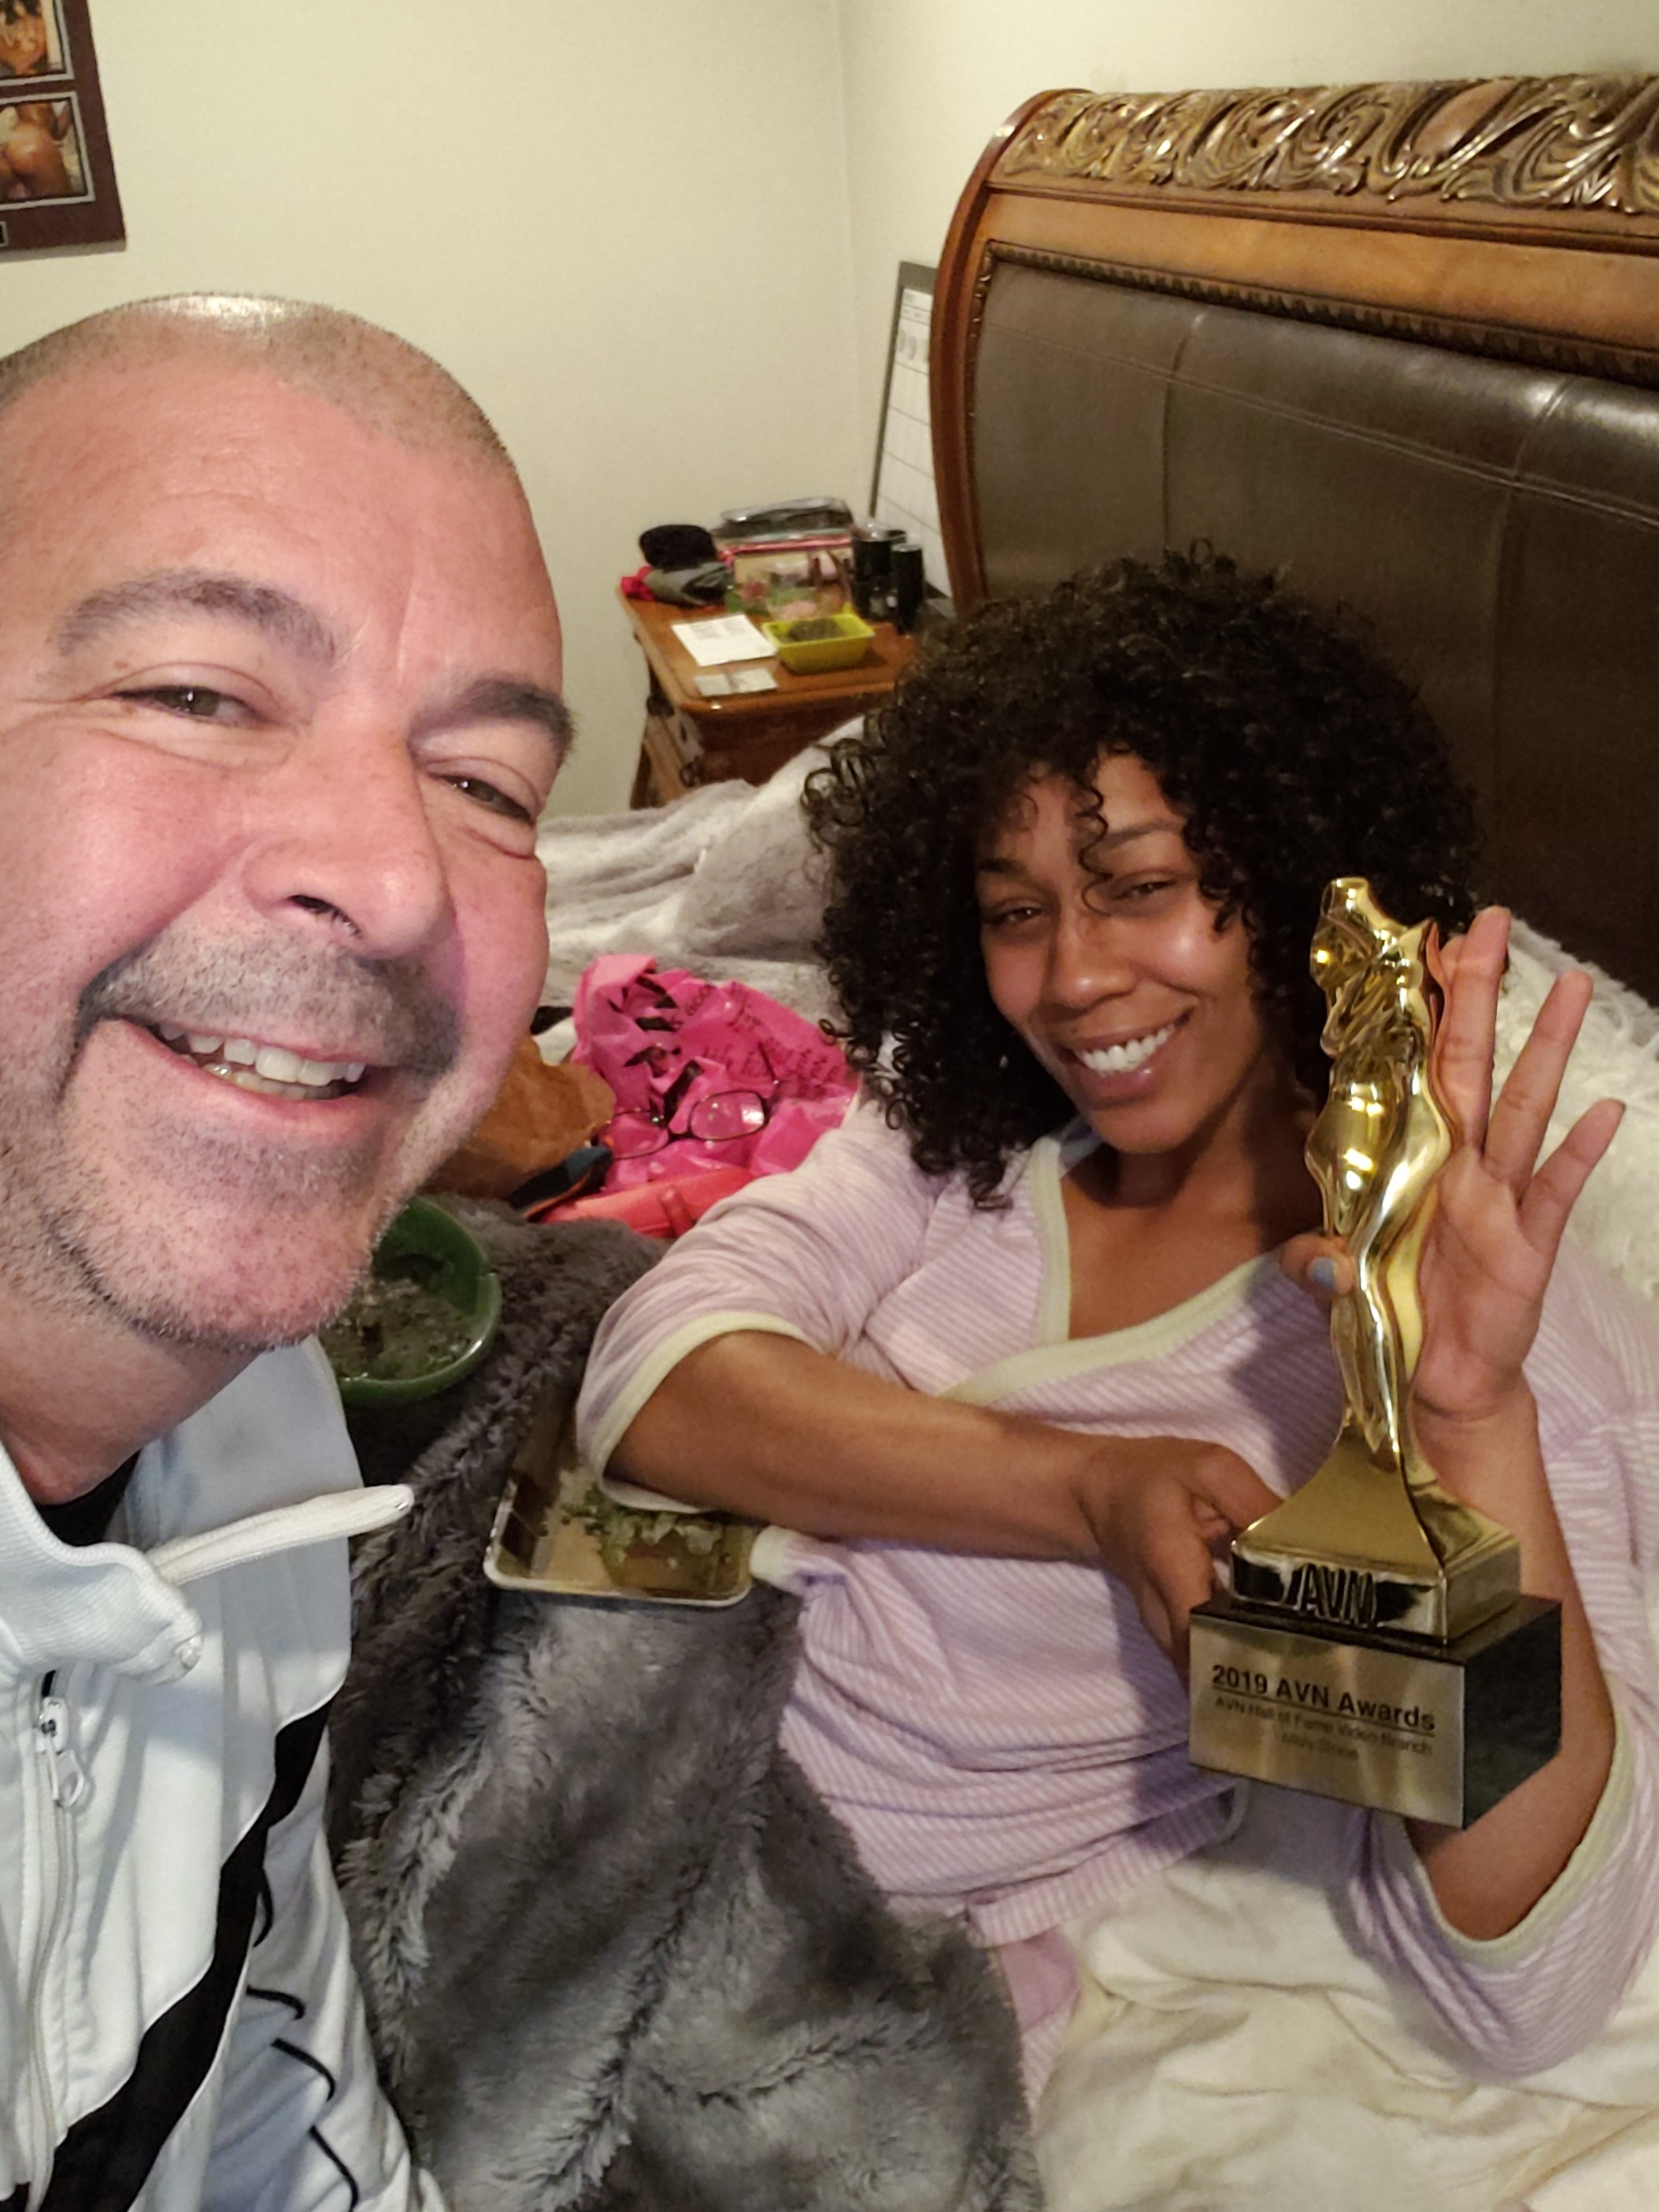 Misty Stone receives AVN Hall of Fame, Go Fund Me Campaign set to help with her recovery